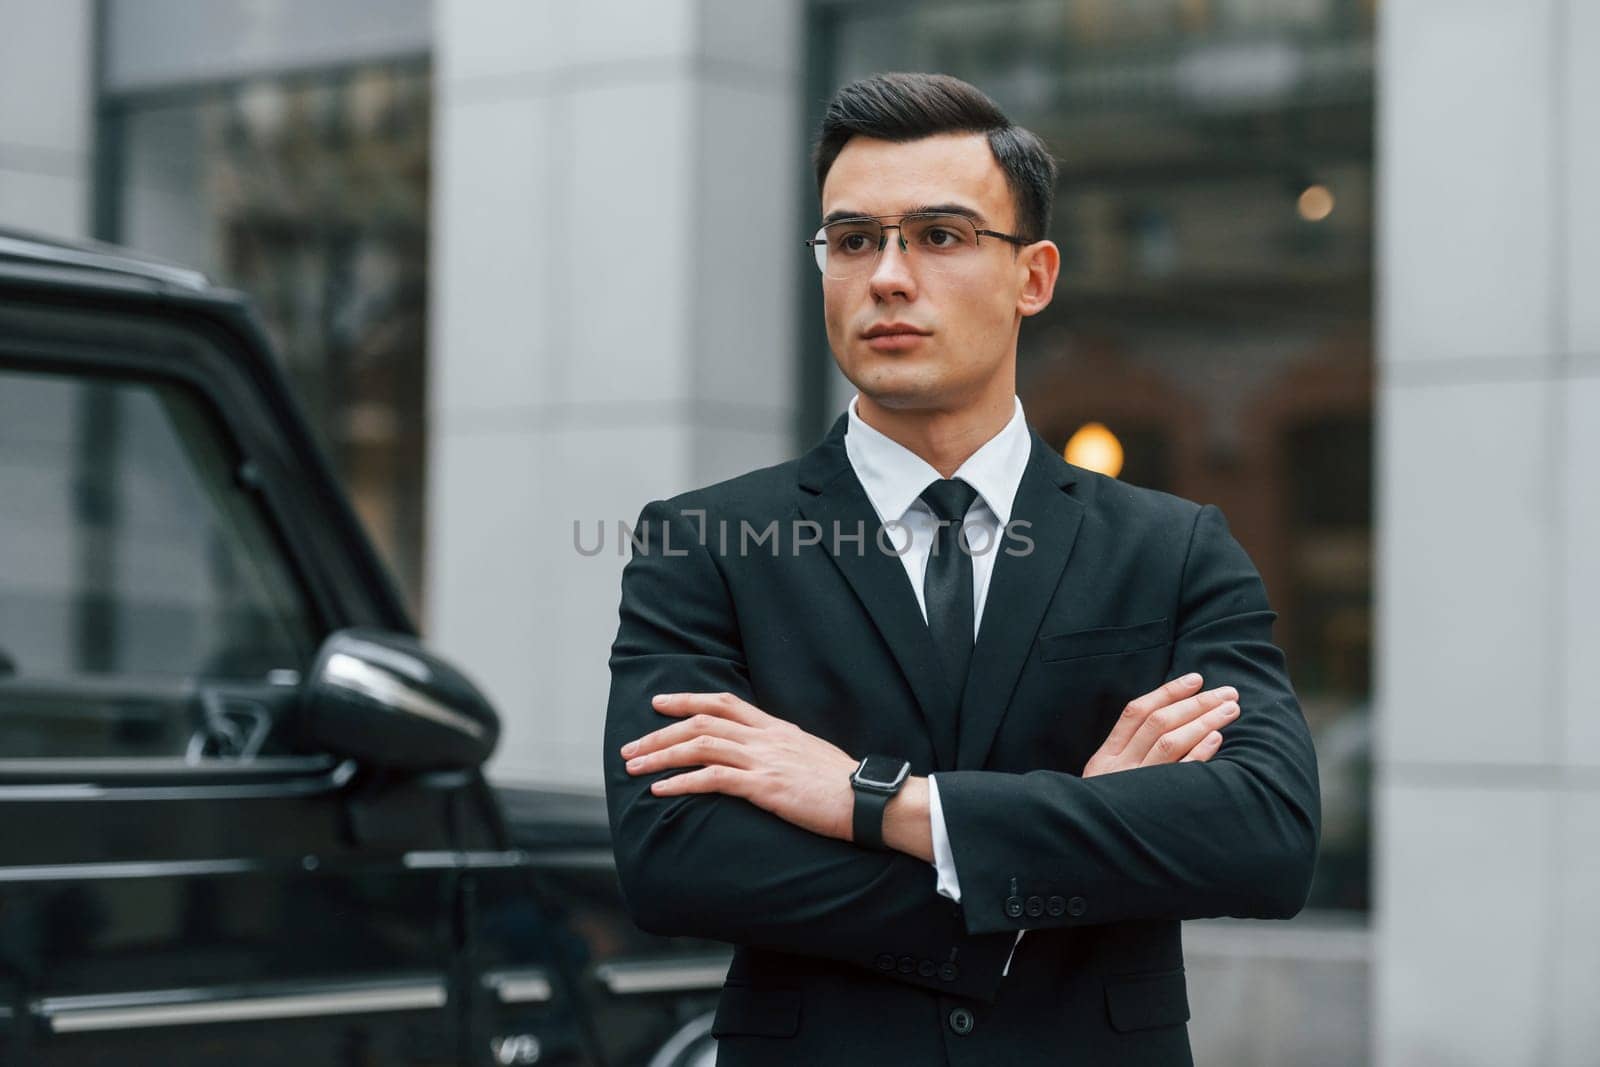 Standing with arms crossed. Businessman in black suit and tie is outdoors in the city.